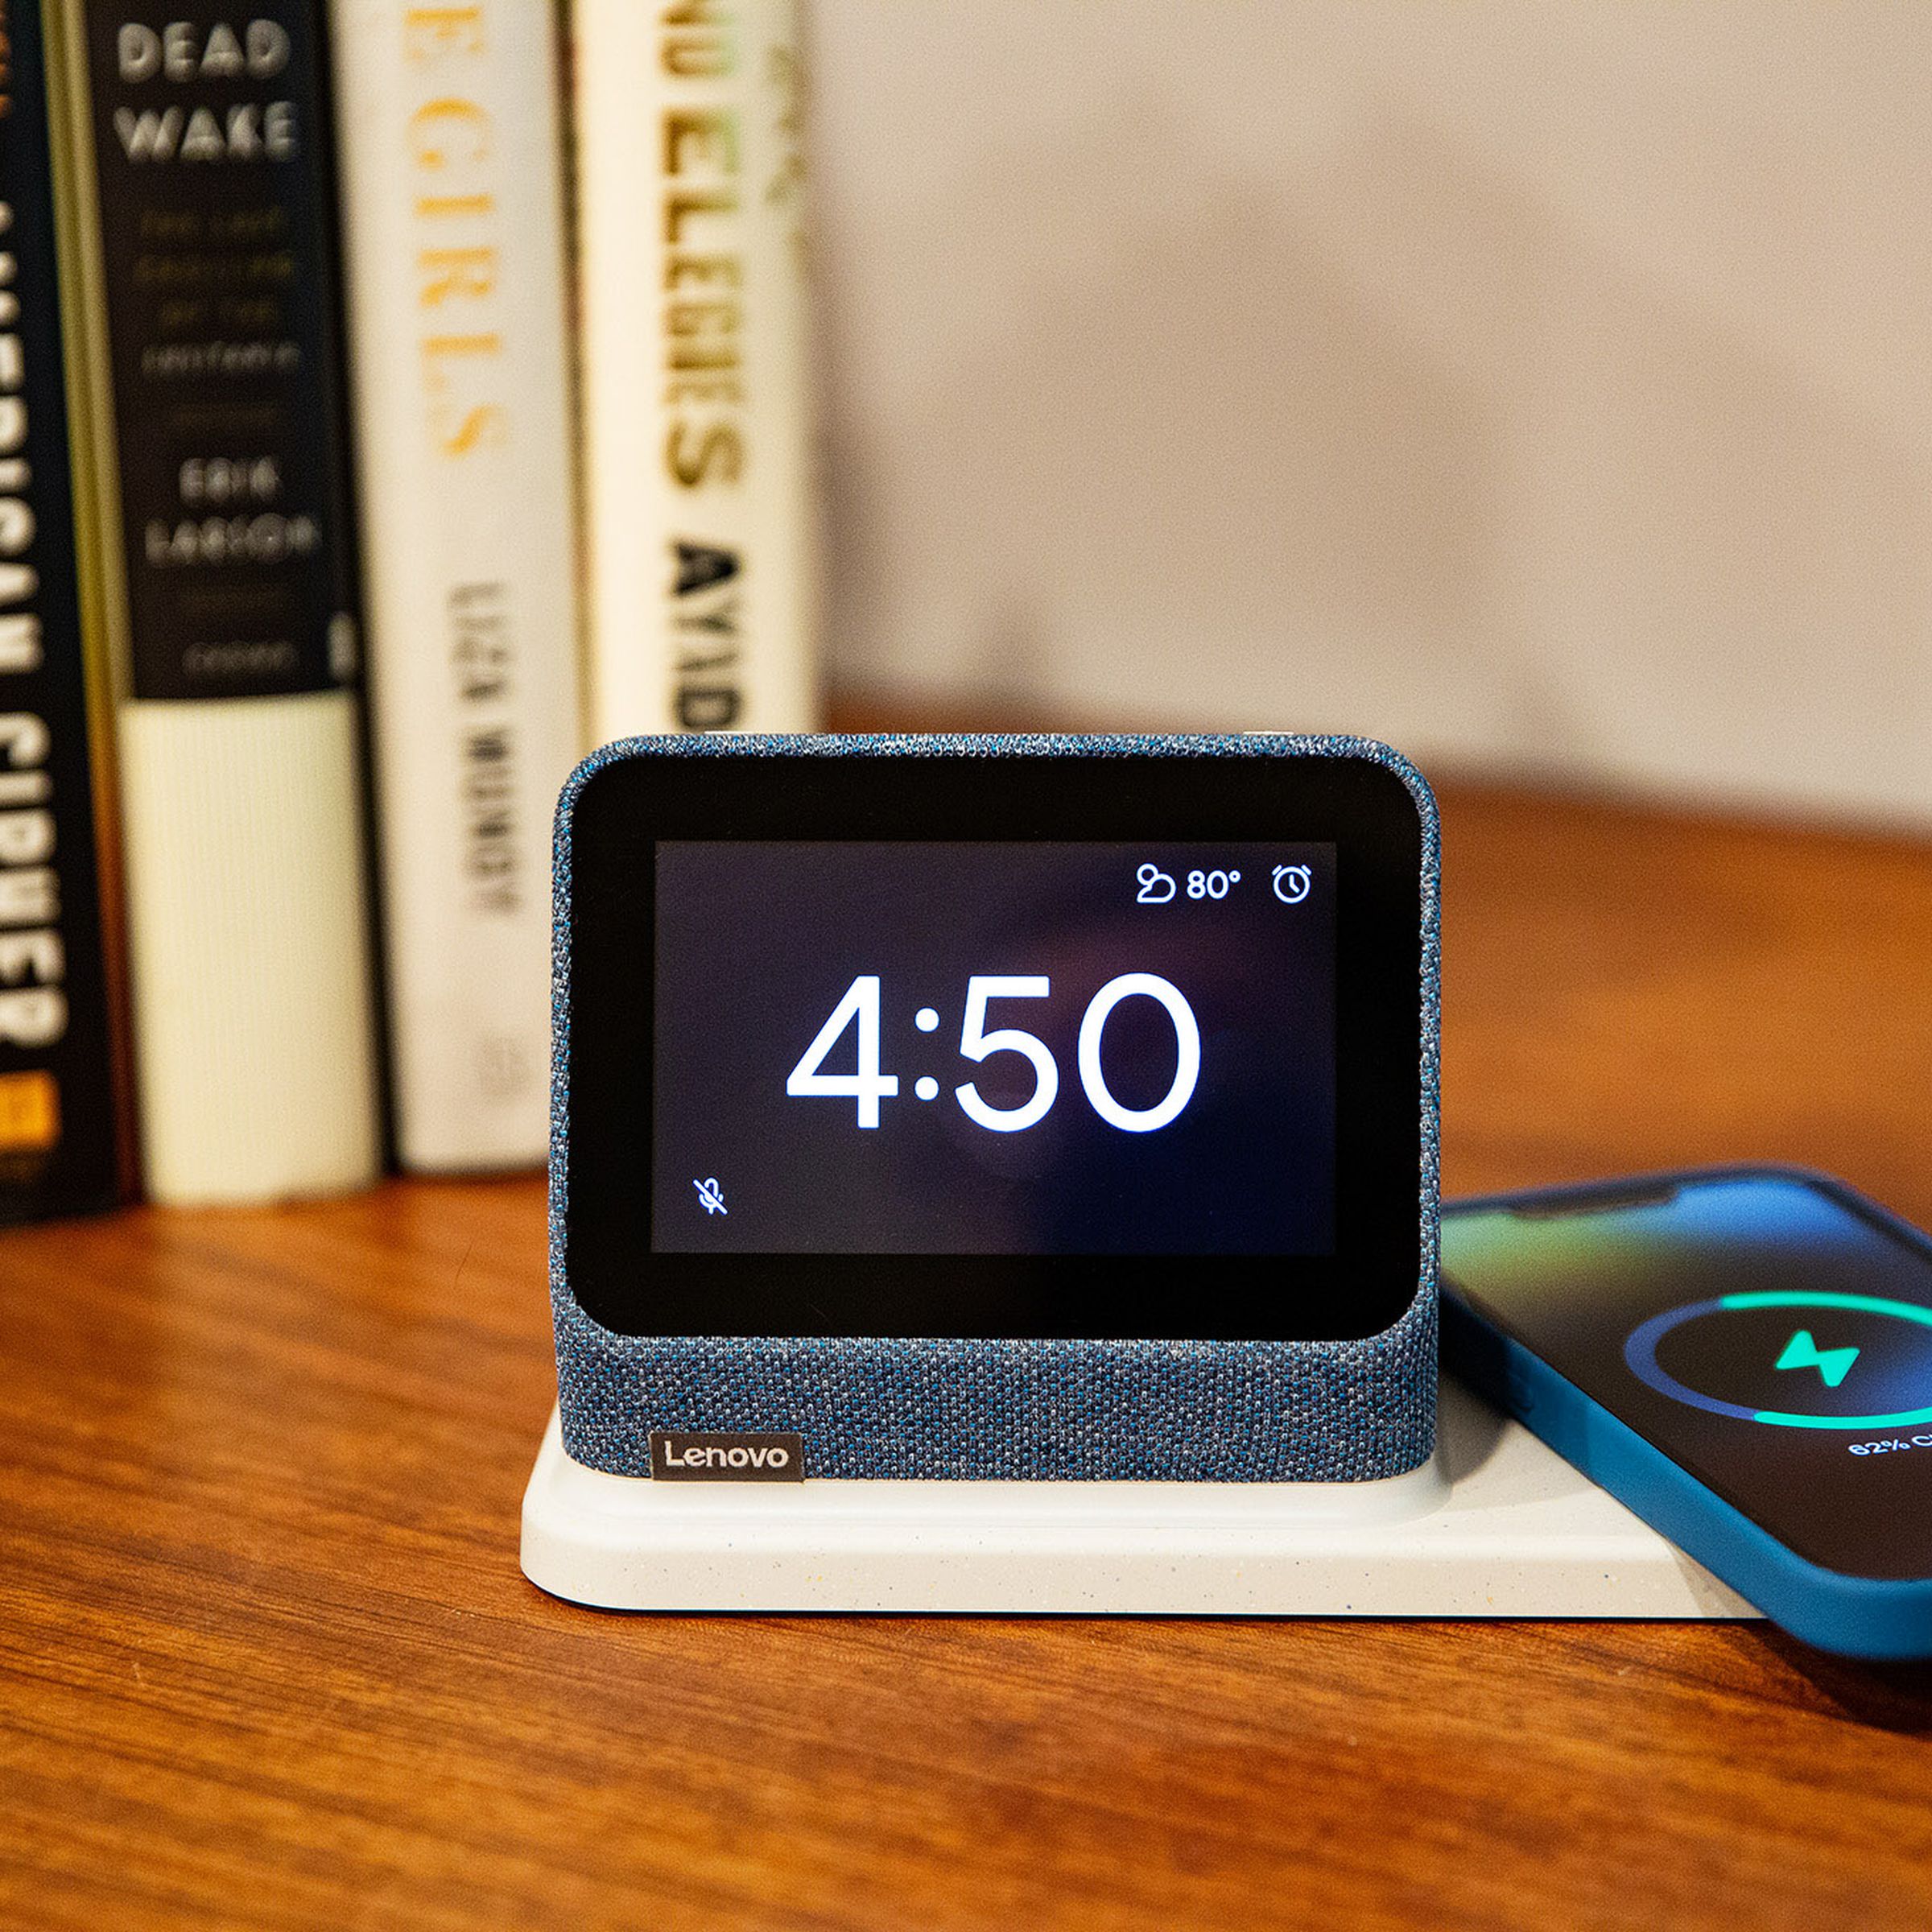 The Lenovo Smart Clock 2 displaying the time while a phone wirelessly charges on its dock.